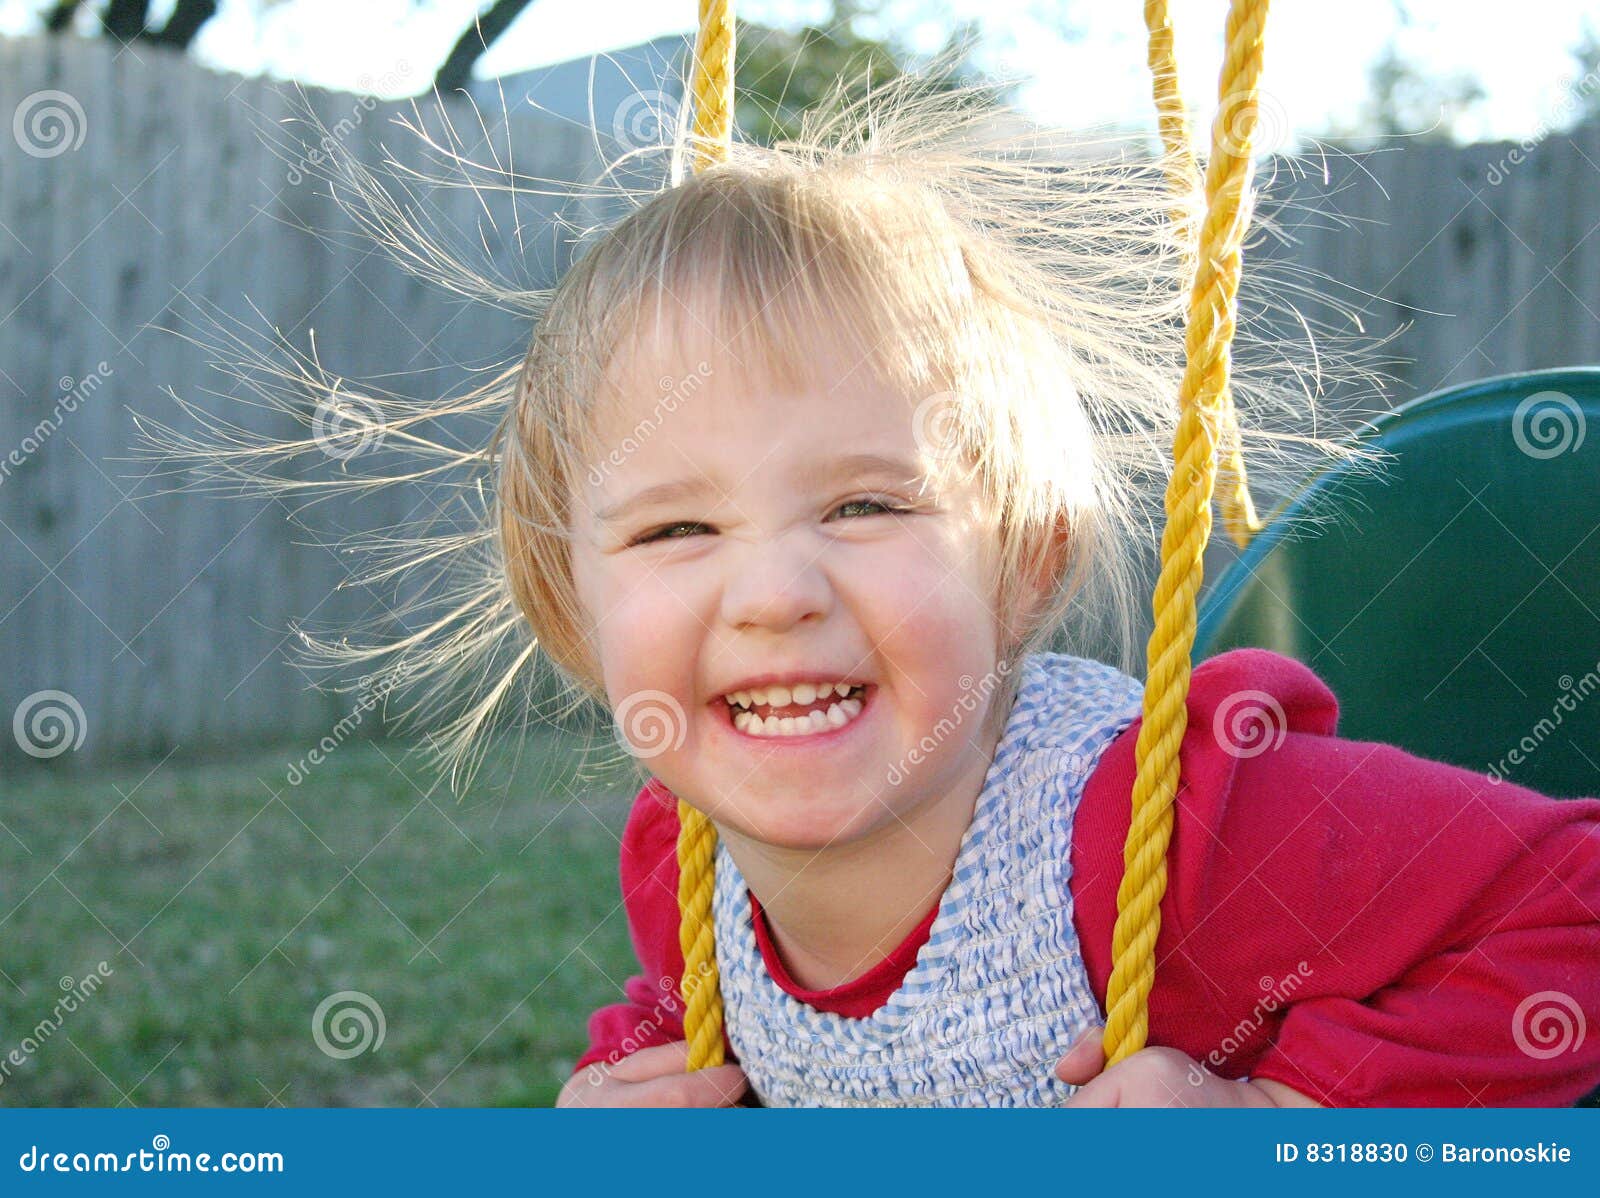 swinging and static electricity